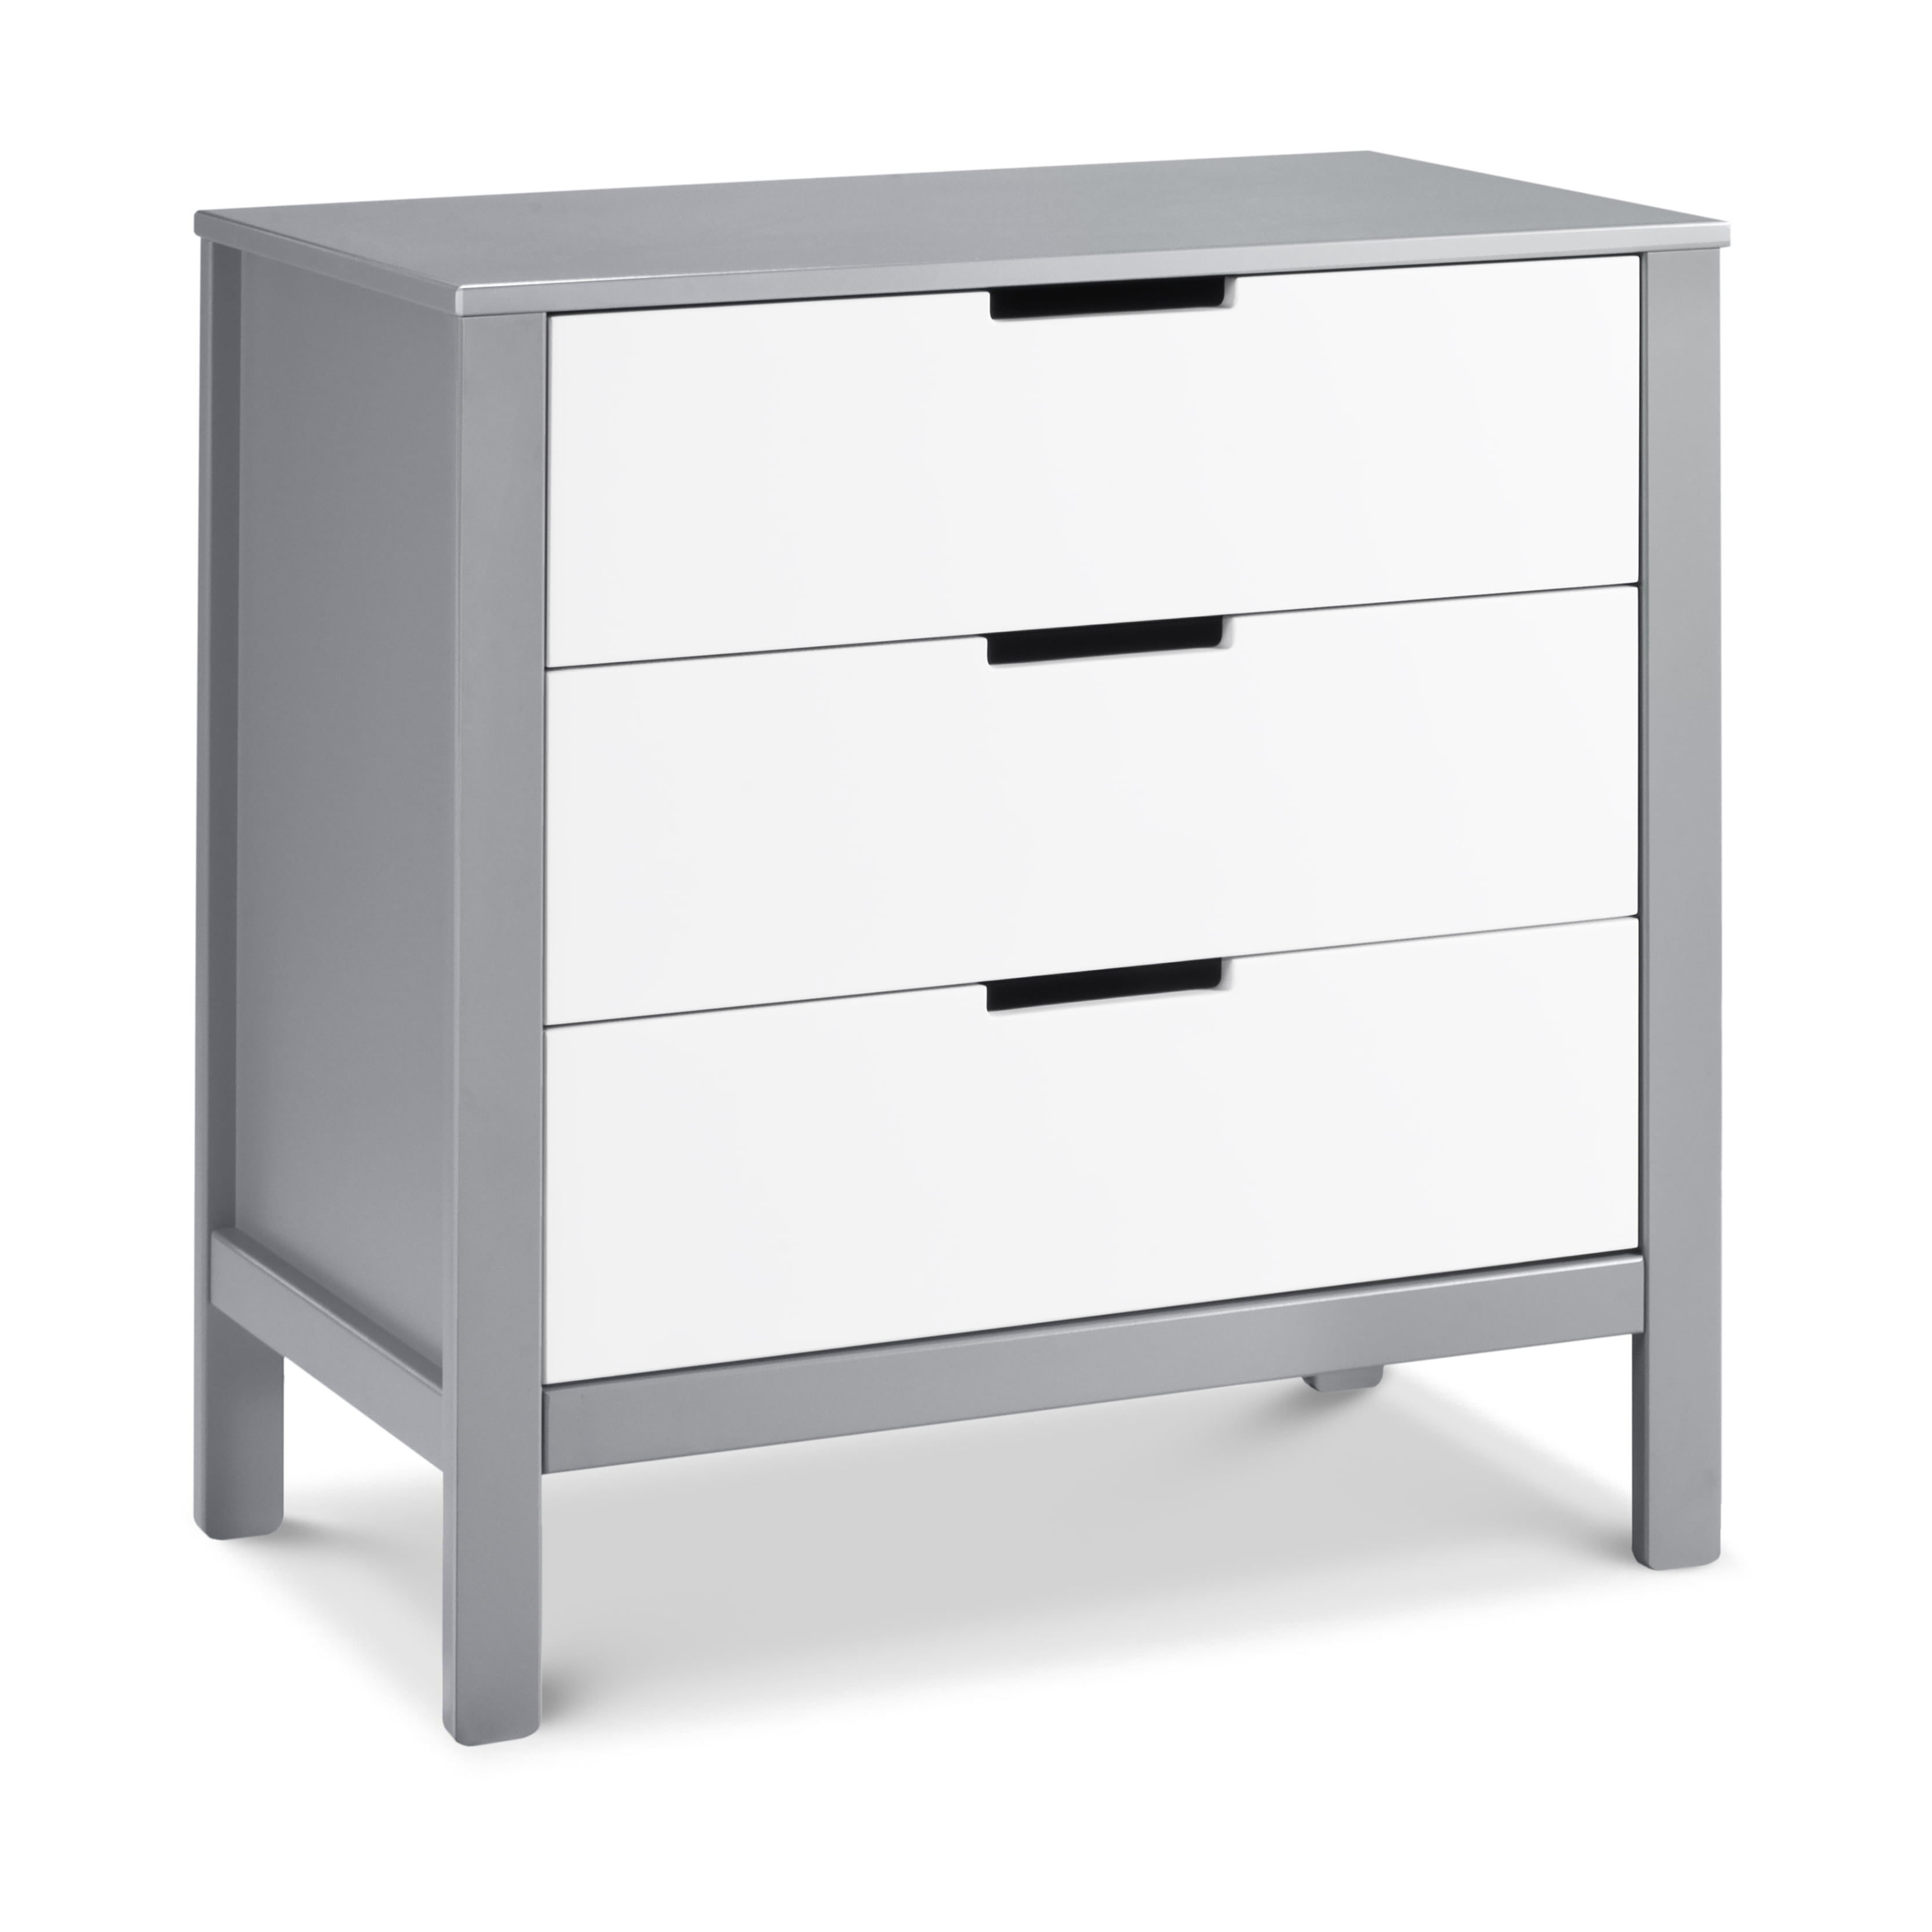 Carter's by DaVinci Colby 3Drawer Dresser in Gray and White